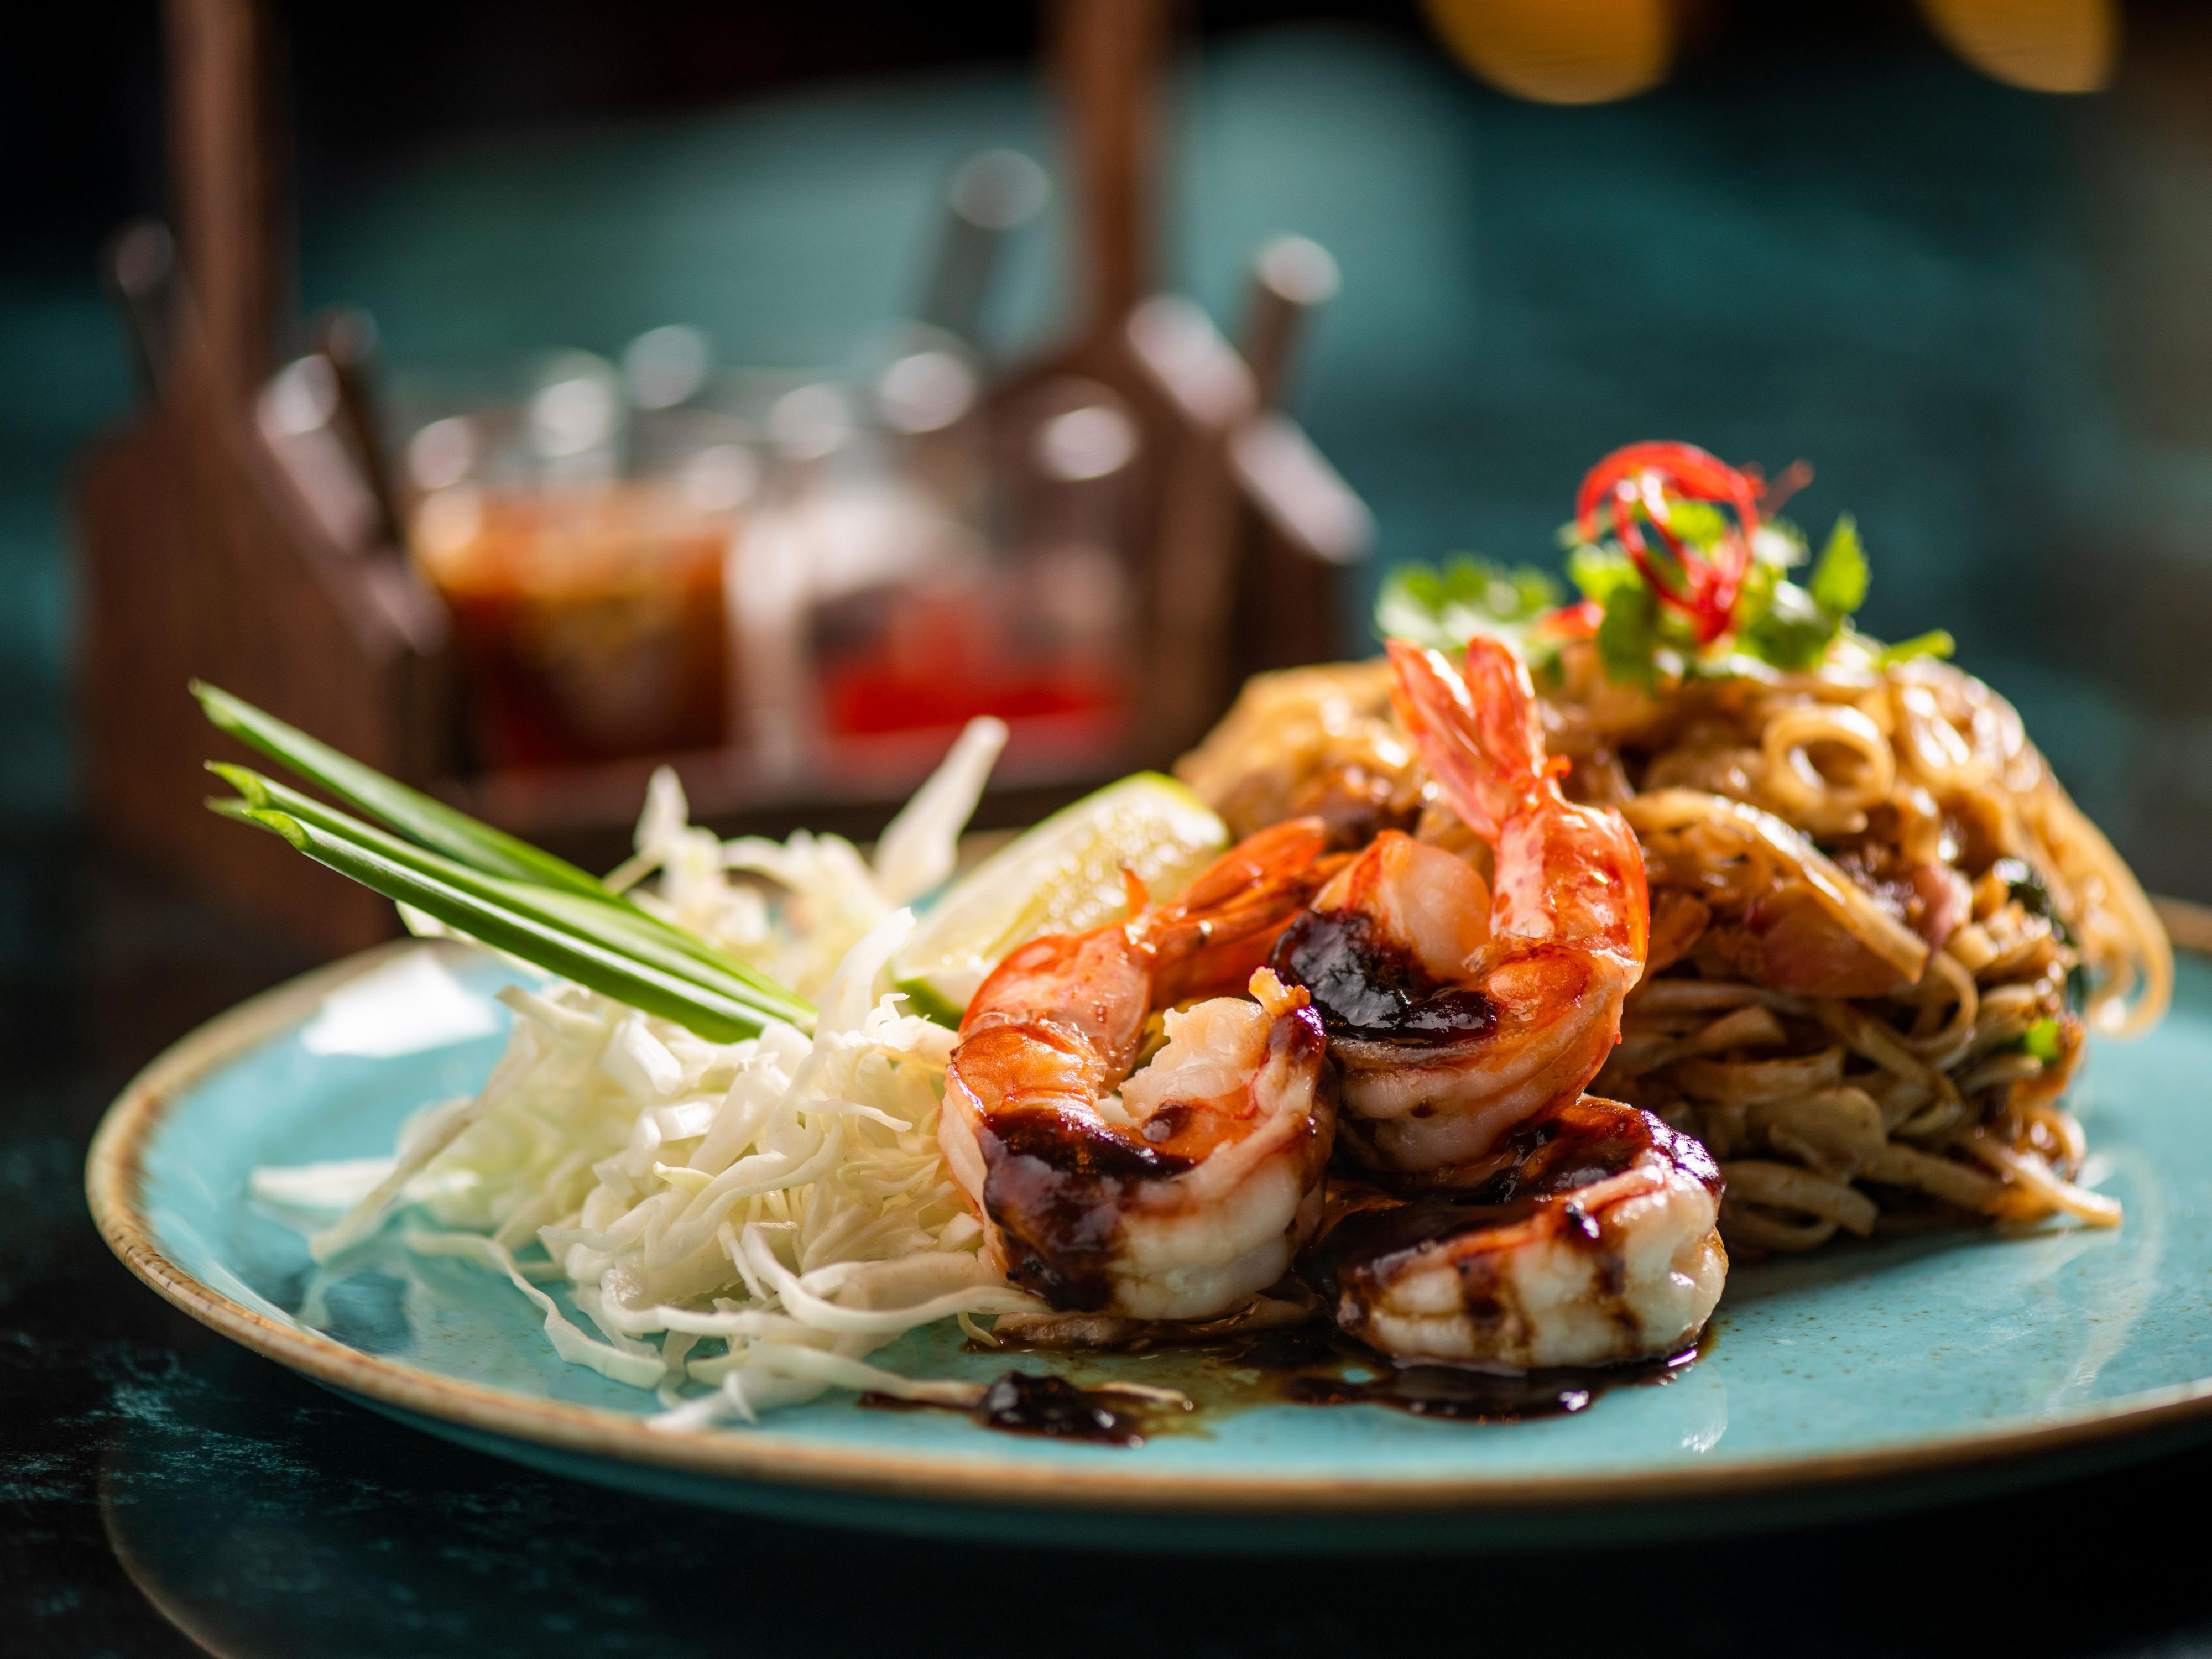 Join us on a magical journey of mystical influence and savour delectable native flavours of Thai cuisine. Enjoy the unique outdoor seating adding authenticity to this fascinating dining experience.